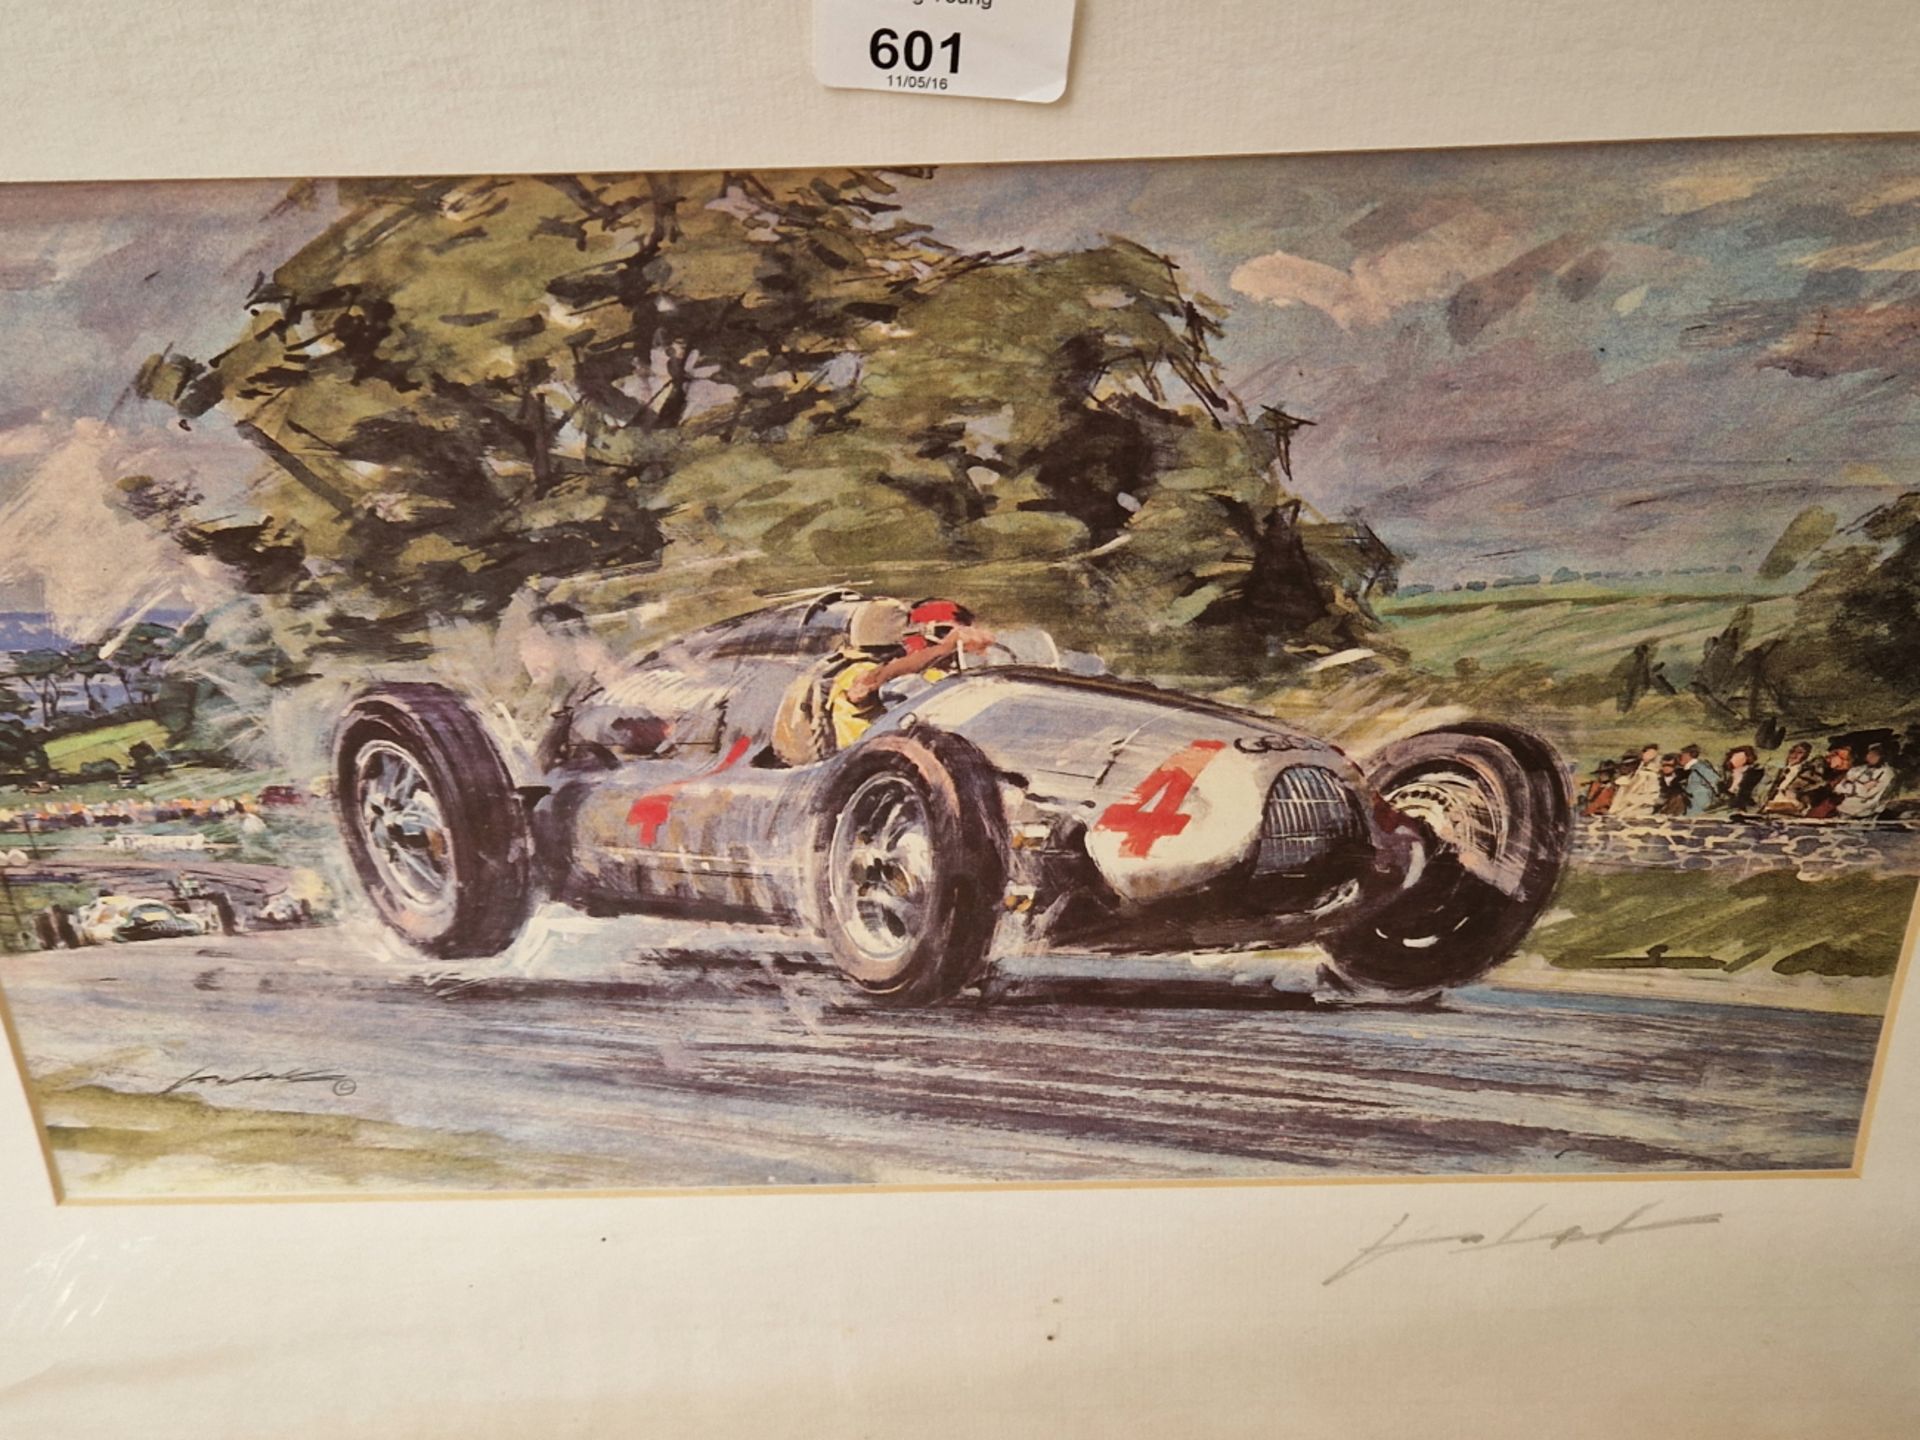 A GROUP OF AUTO RELATED VINTAGE COLOUR PRINTS, SOME PENCIL SIGNED BY WALTER GOTSCHKE. SIZES VARY - Image 3 of 6